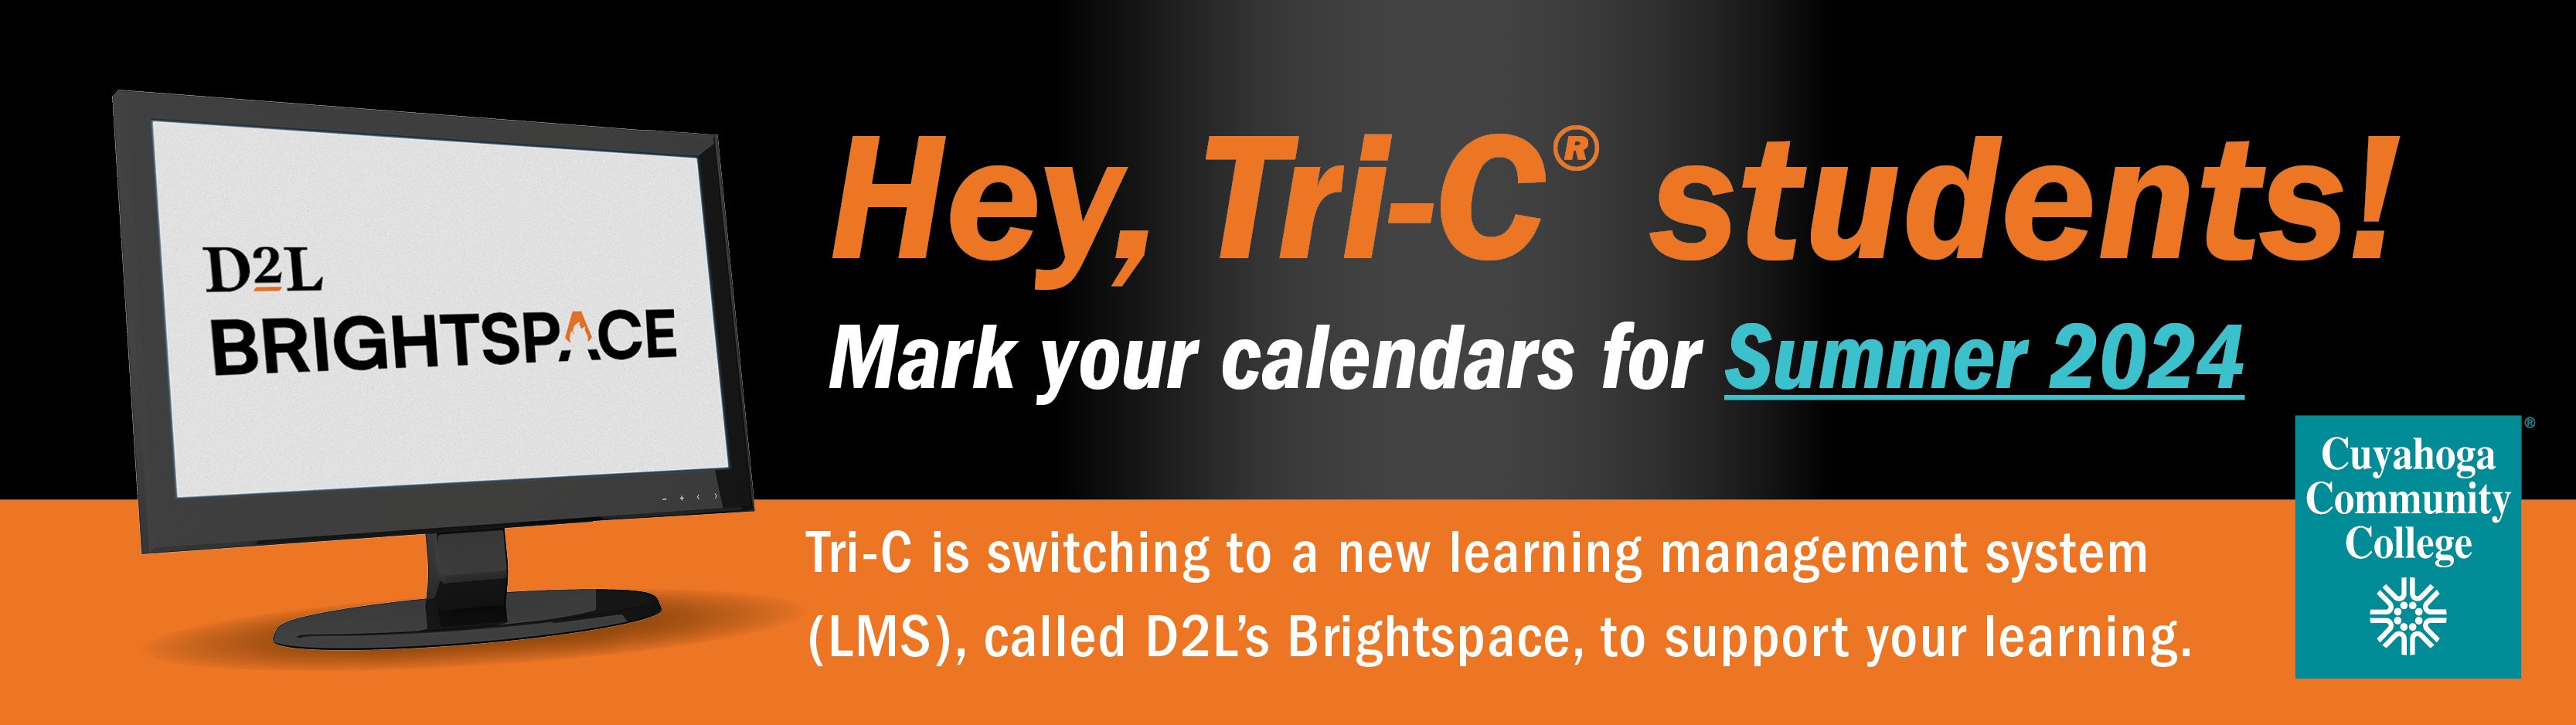 Promotion for Tri-C's move to the Brightspace Learning Management System